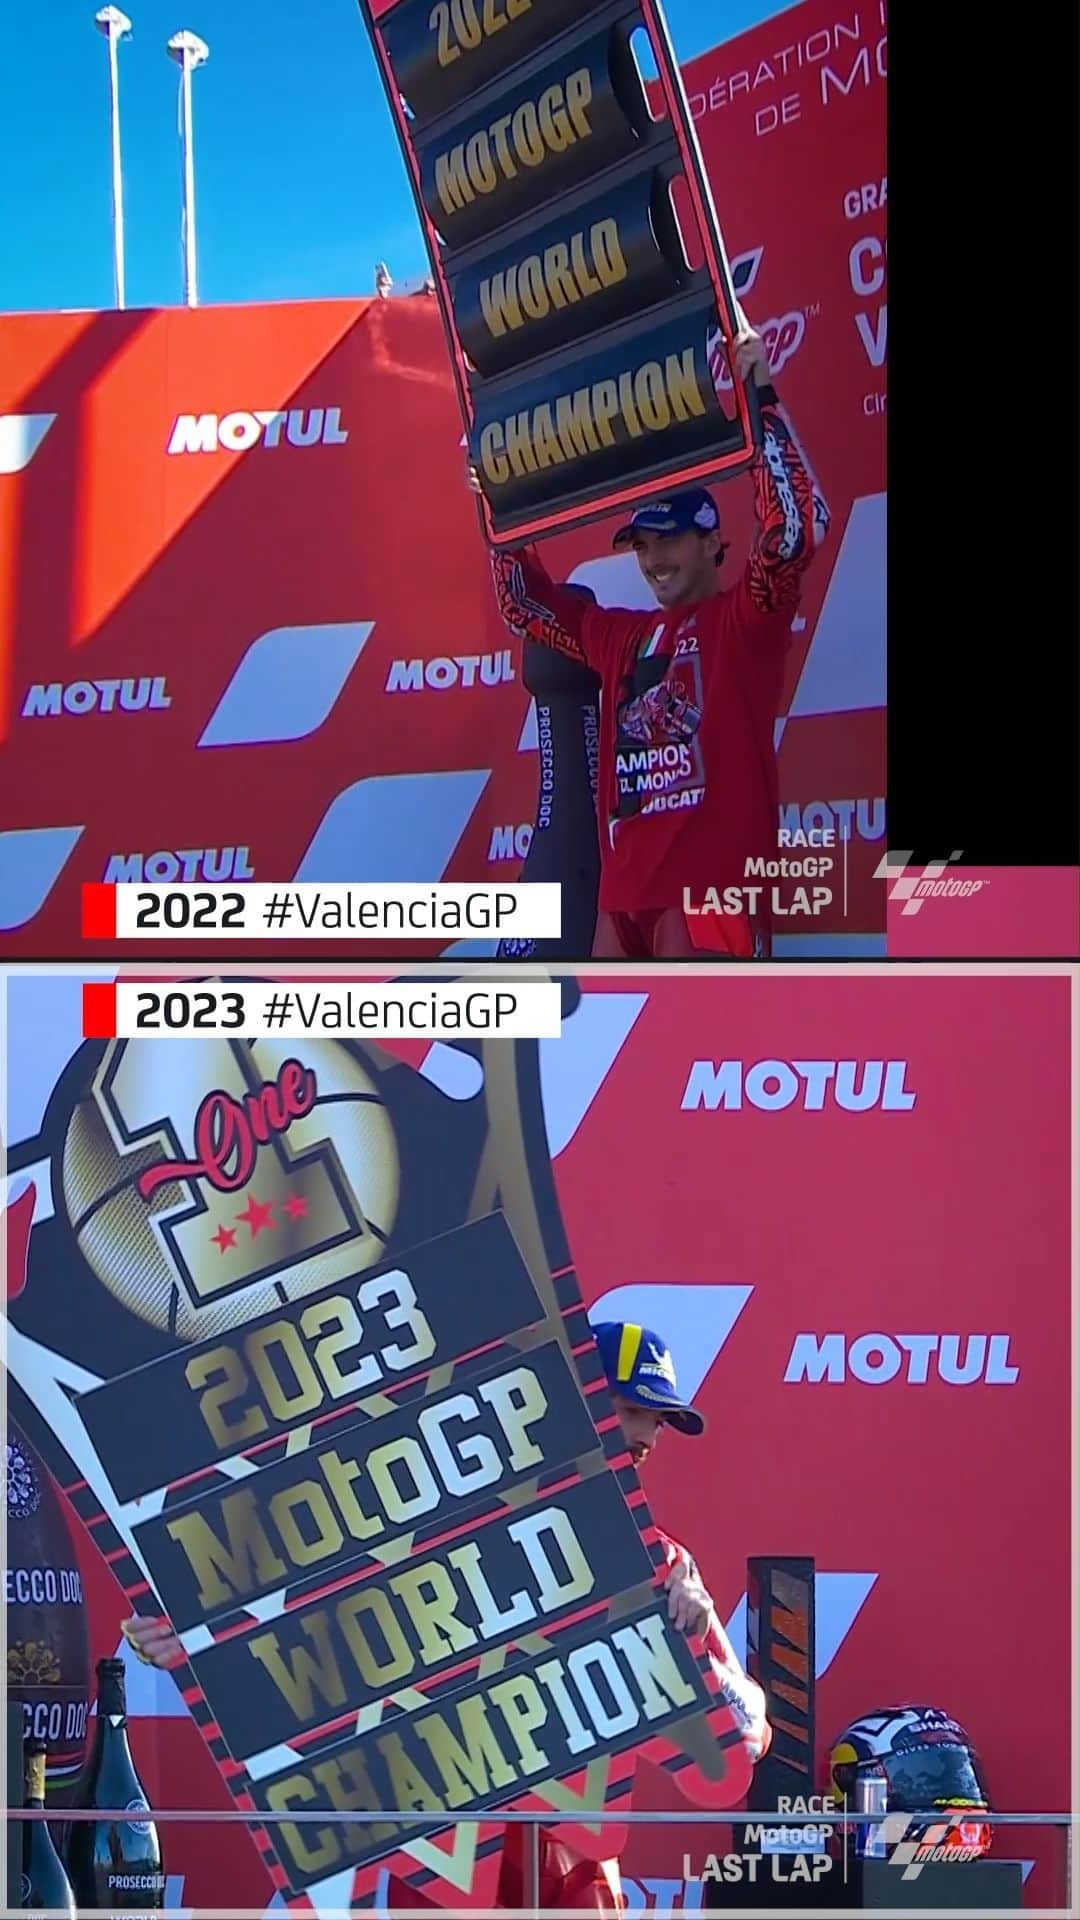 MotoGPのインスタグラム：「From the #PerfectComb1nation to #BACK2BACKgnaia! 🏆🏆 It was back-to-back title glory and celebrations for @pecco63 and @ducaticorse at the #ValenciaGP! Watch them both at the same time 🥳👀  #MotoGP #PeccoBagnaia #FB1」